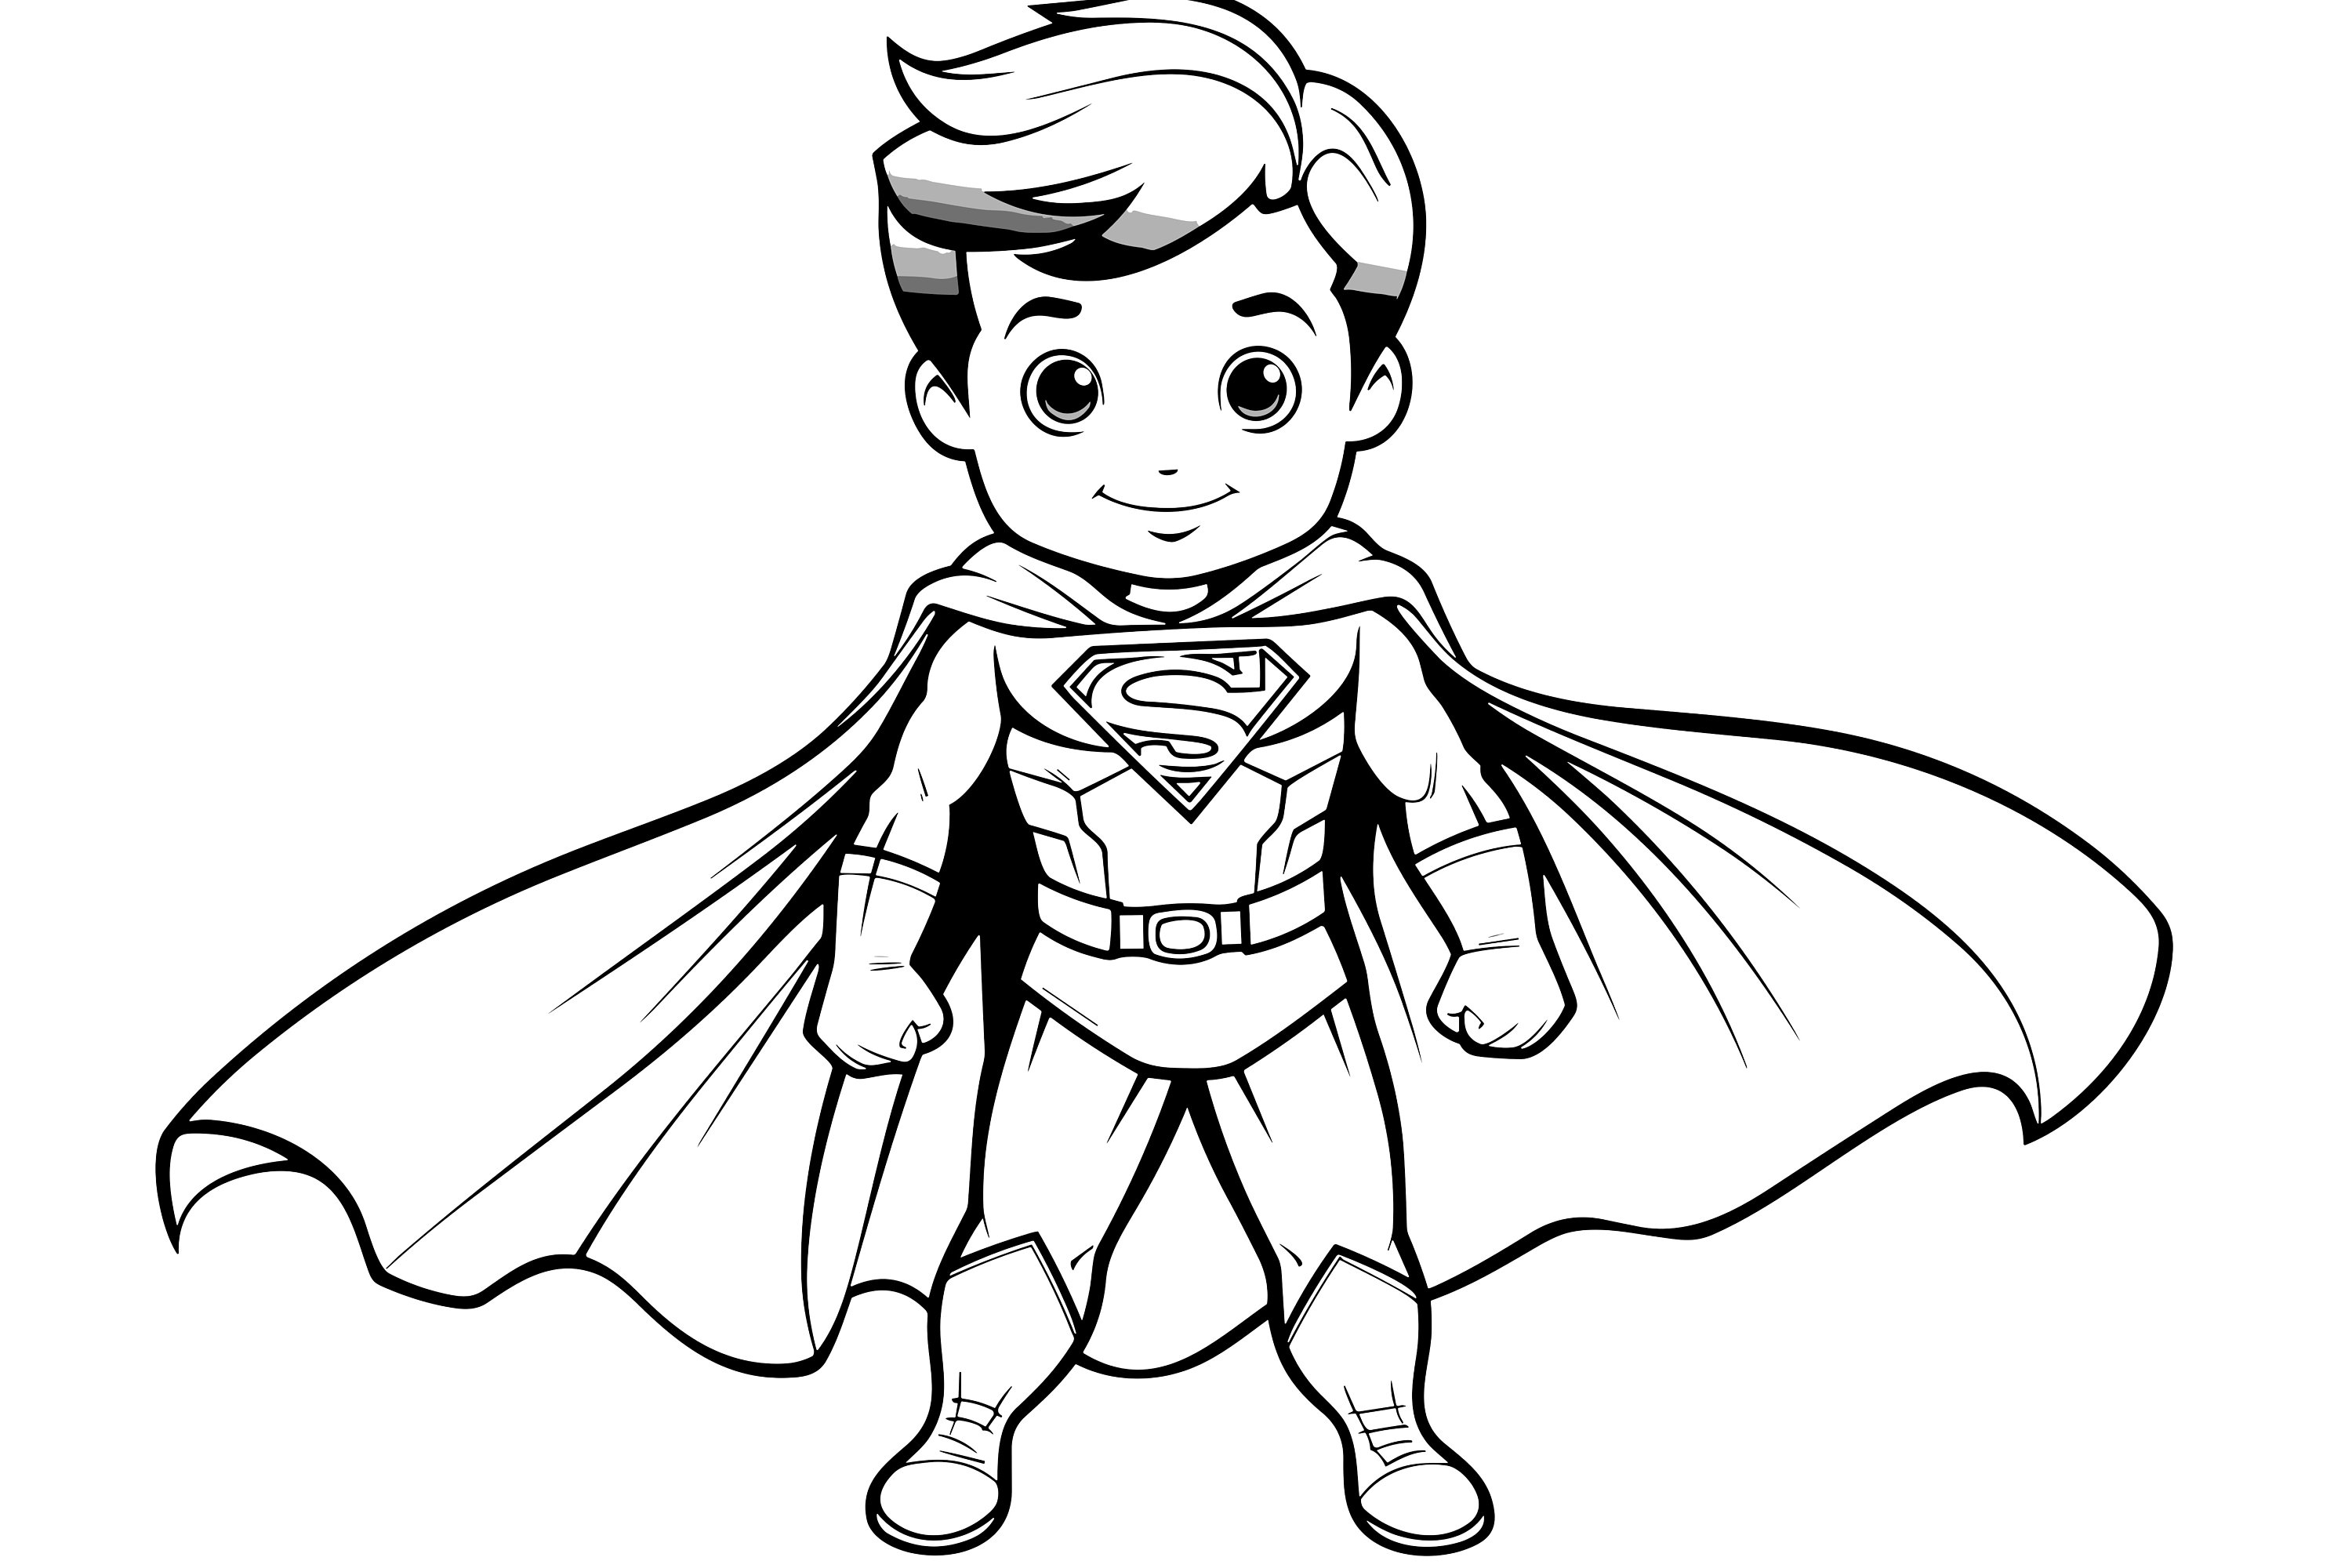 Superheroes coloring pages super heroes coloring book super hero for coloring for kids superheroes for coloring for boy printable pages instant download